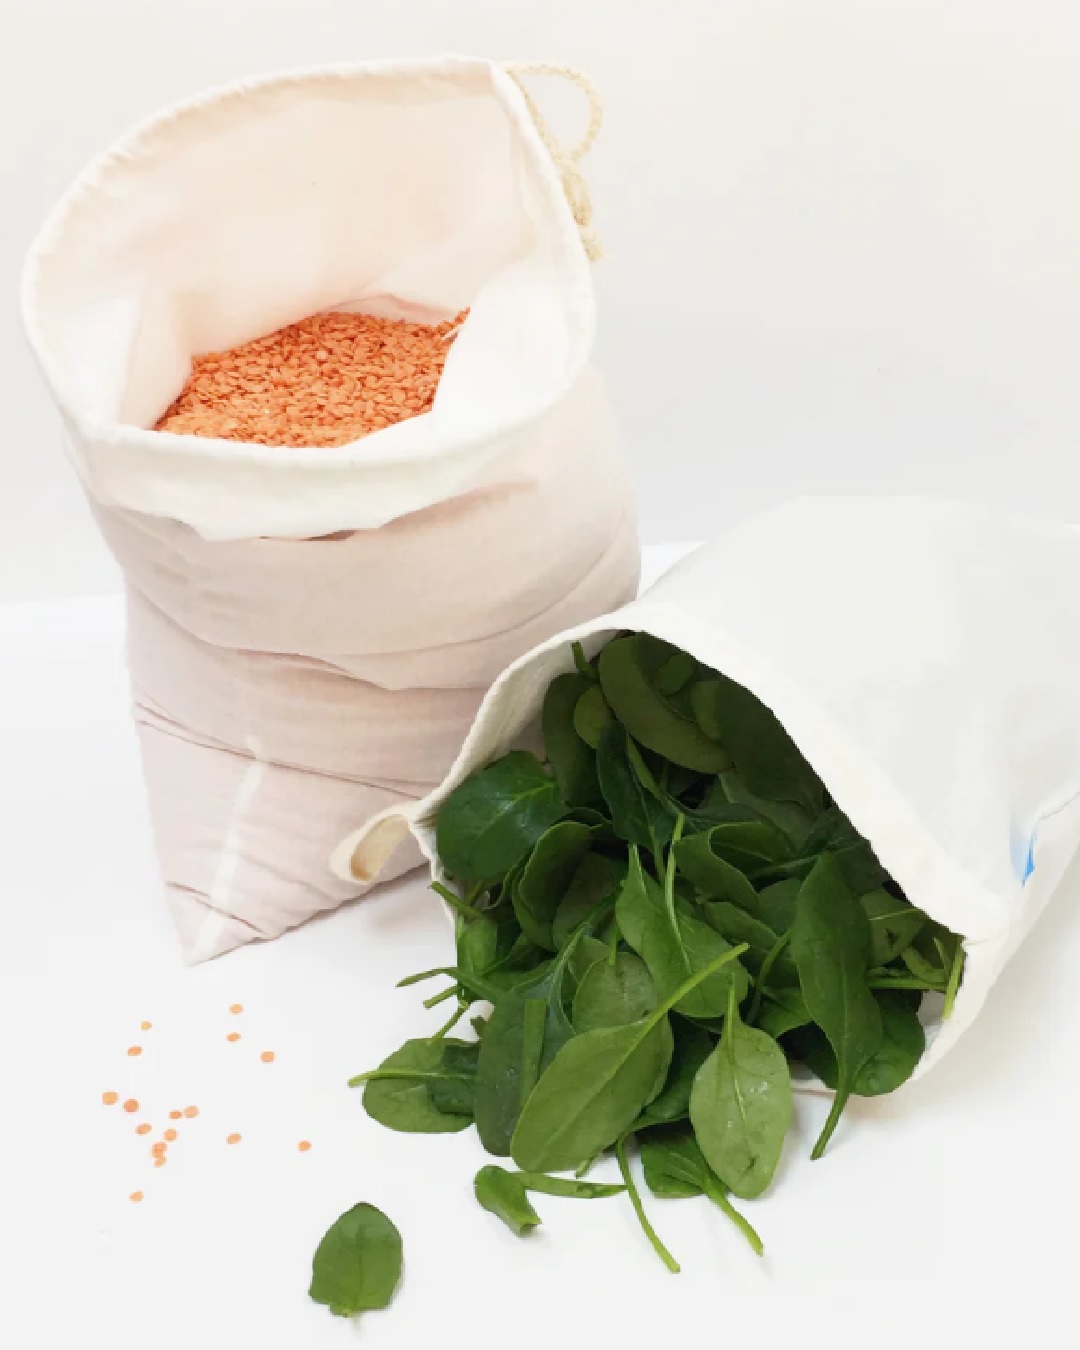 Loot bags with grain and spinach in